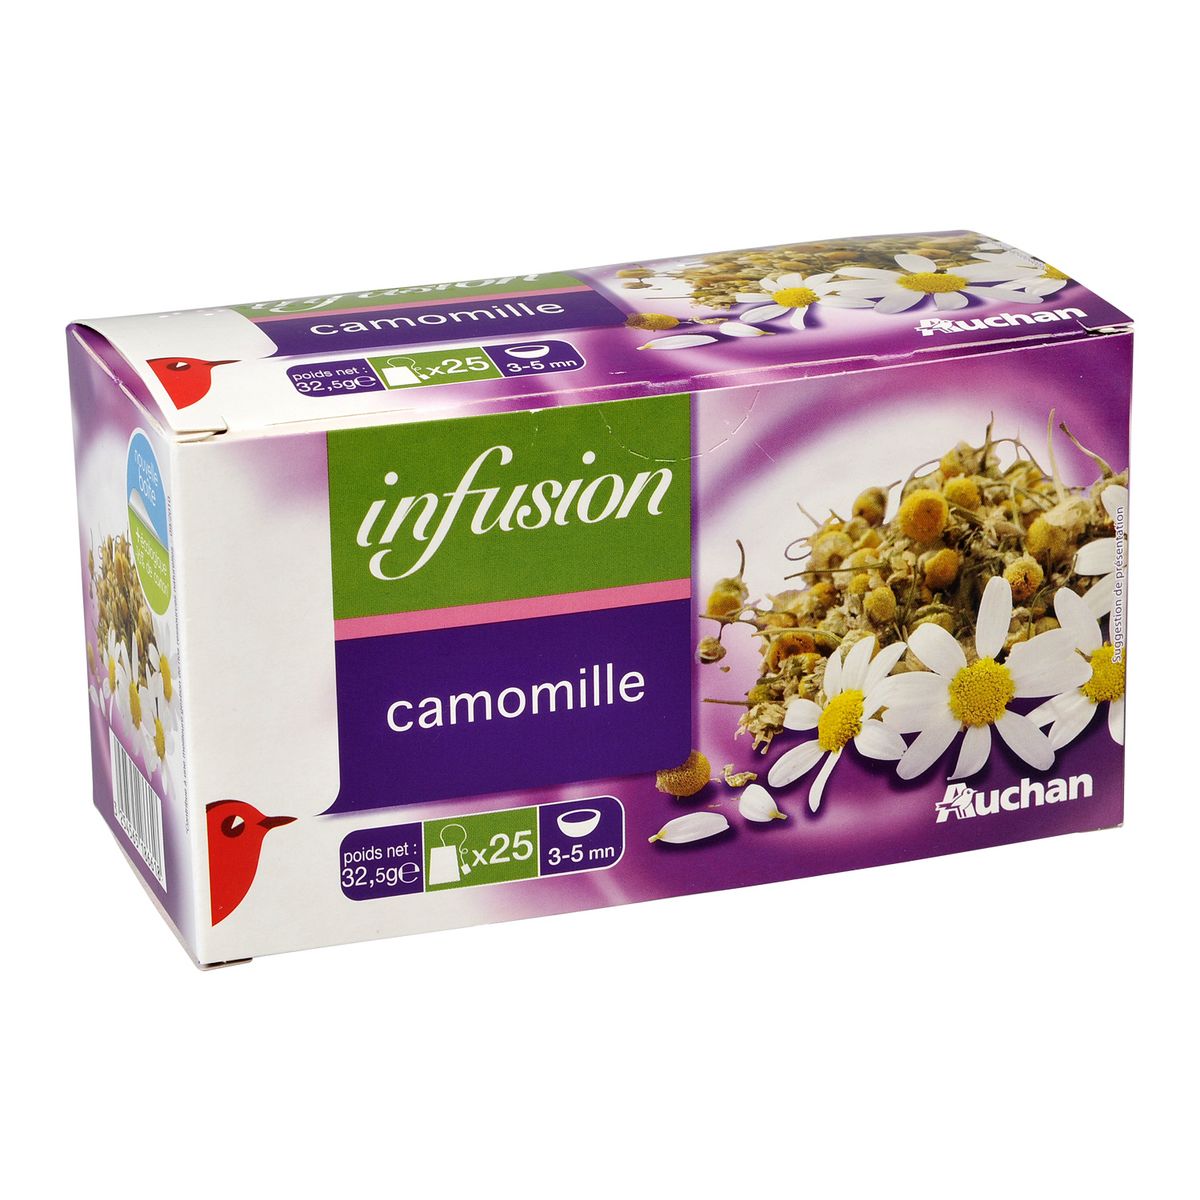 AUCHAN Infusion camomille 25 sachets 32,5g pas cher 